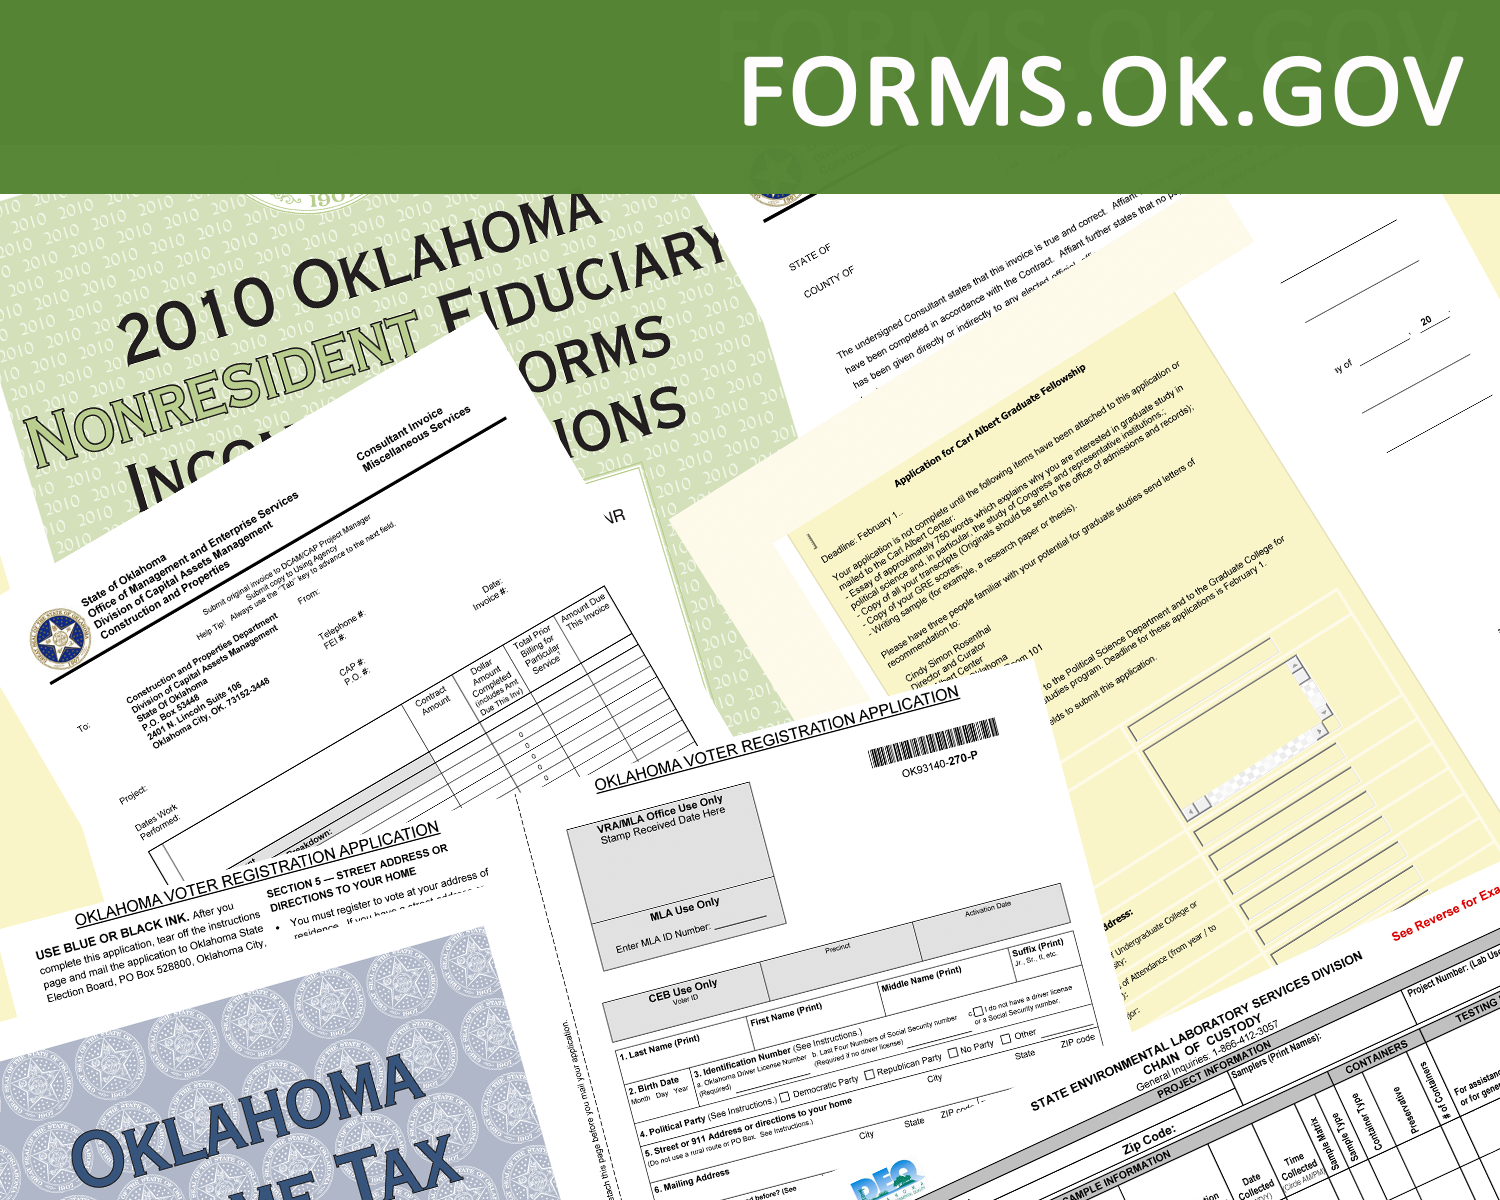 Digital Archives of Forms from State Agencies